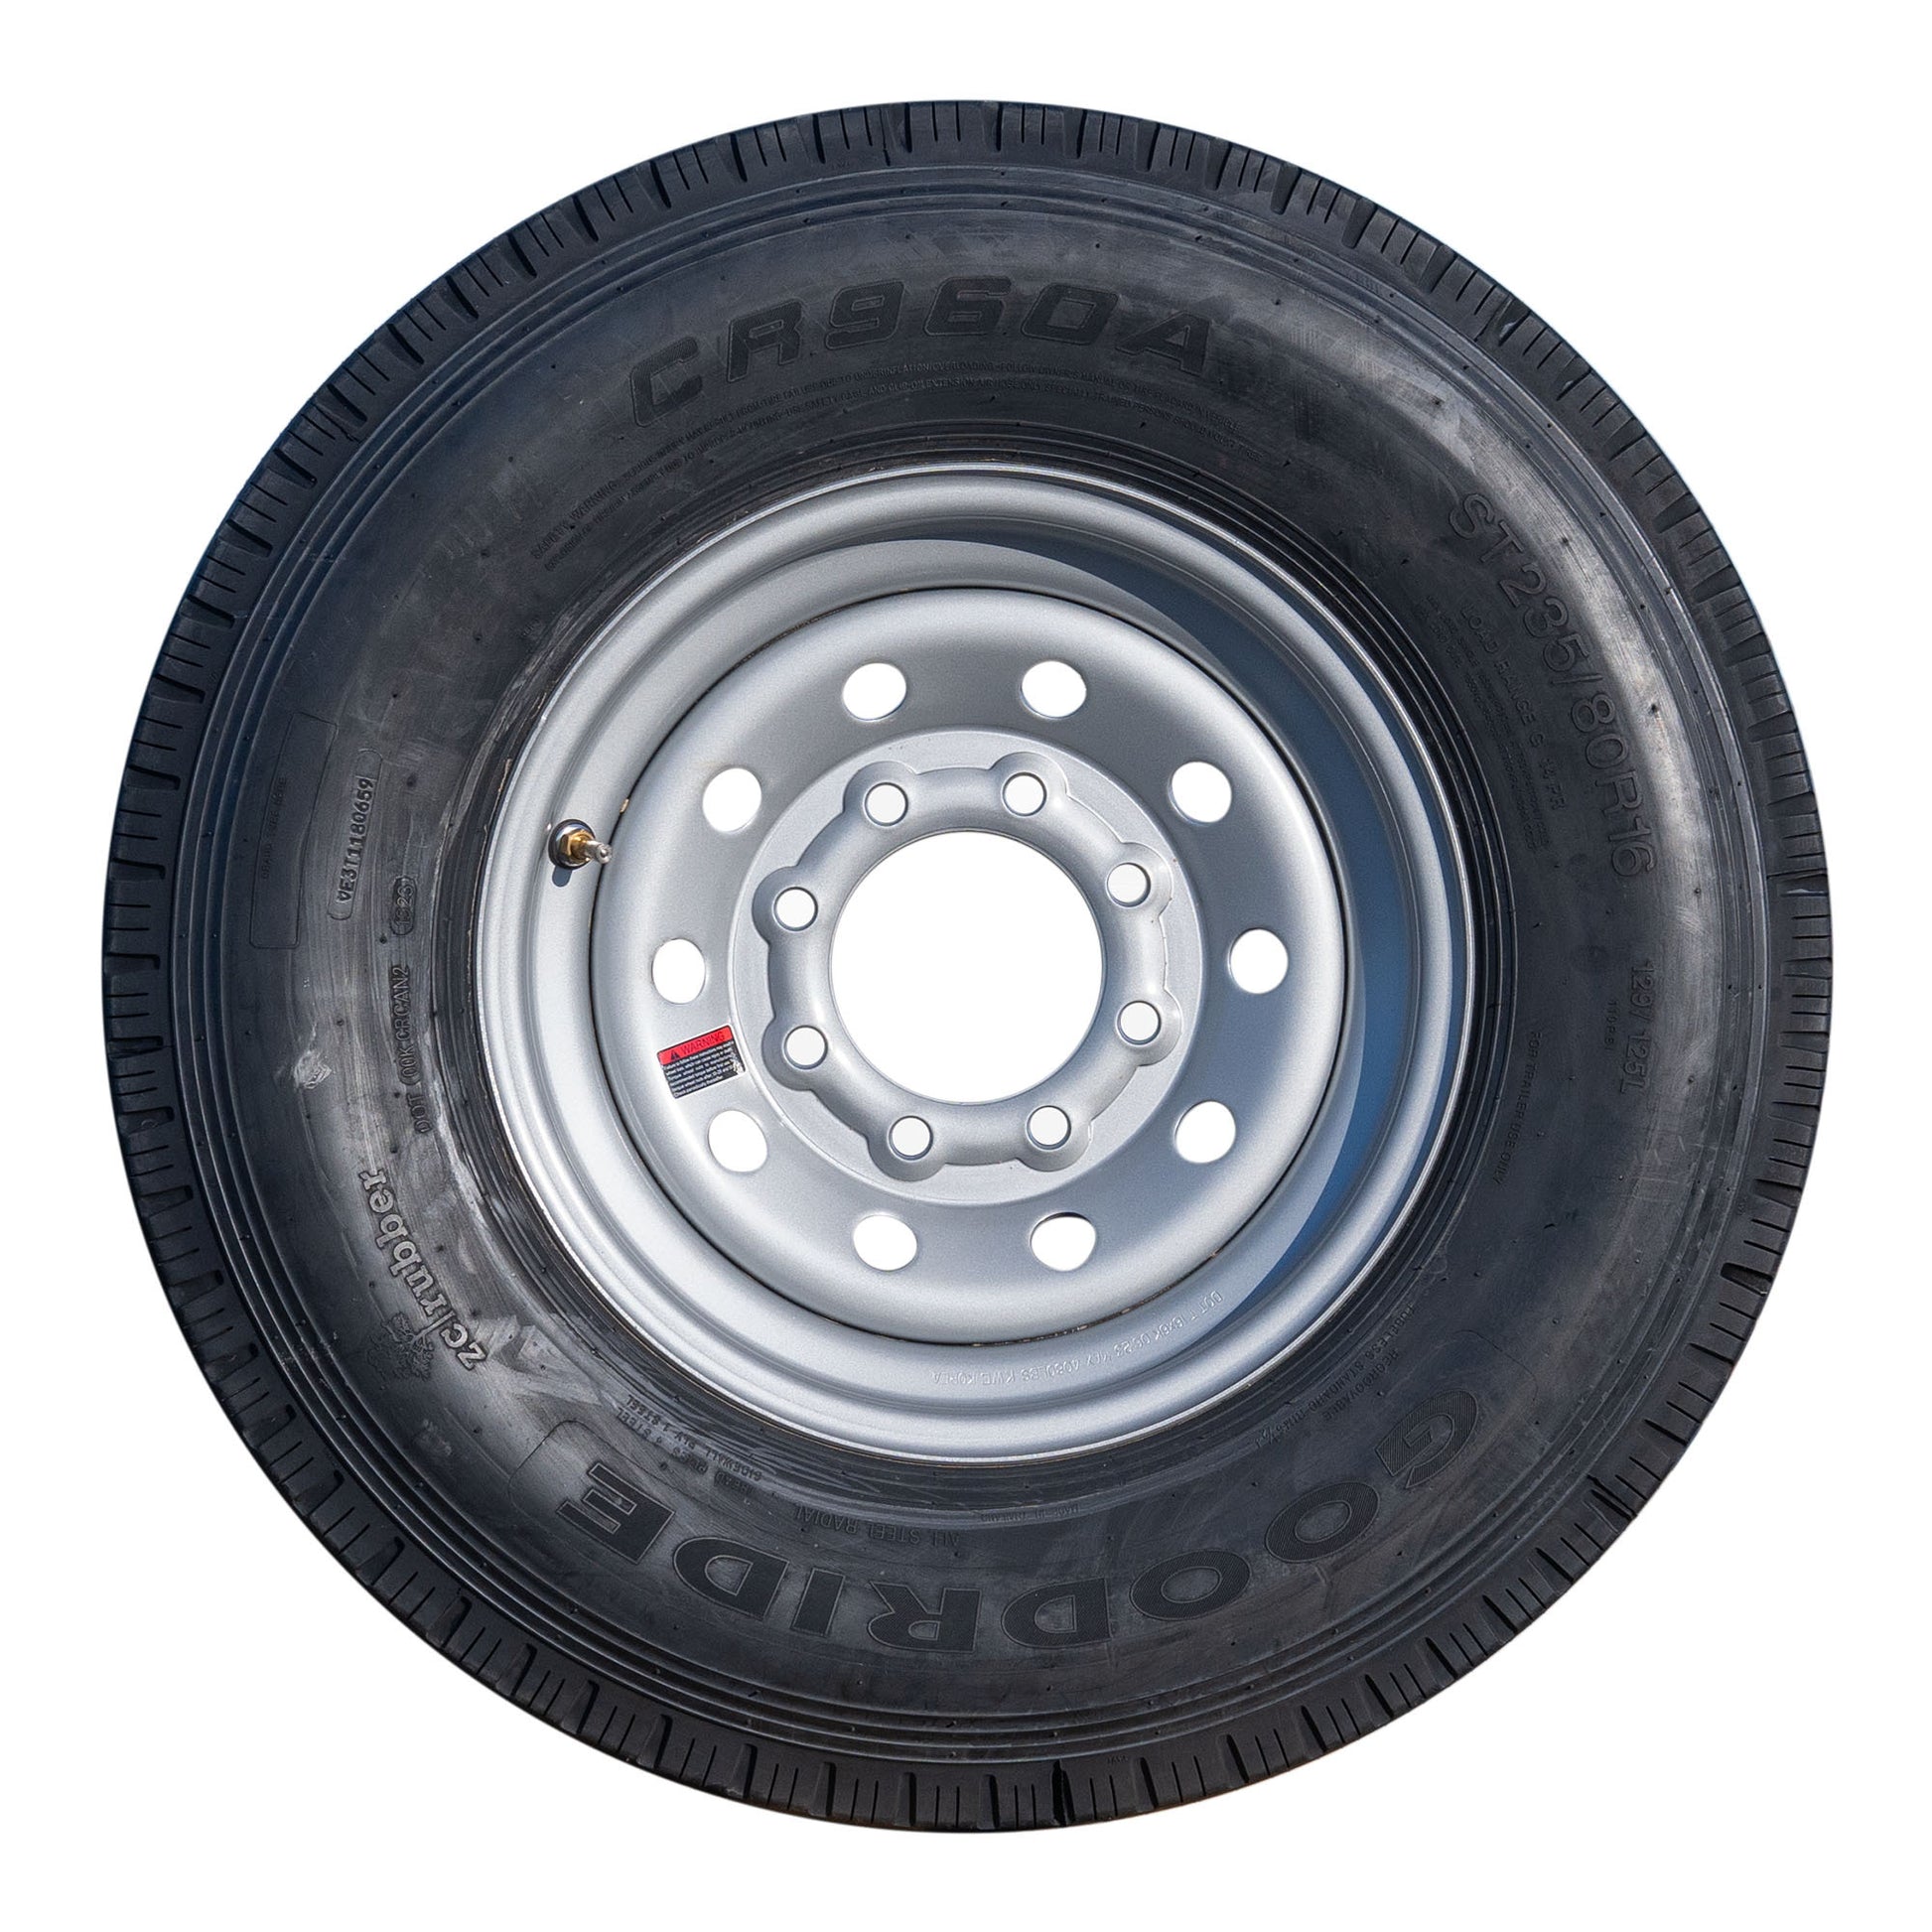 Goodride 16" 14 ply Radial Trailer Tire & Wheel - ST 235/80 R16 8 Lug (Silver Mod) - The Trailer Parts Outlet